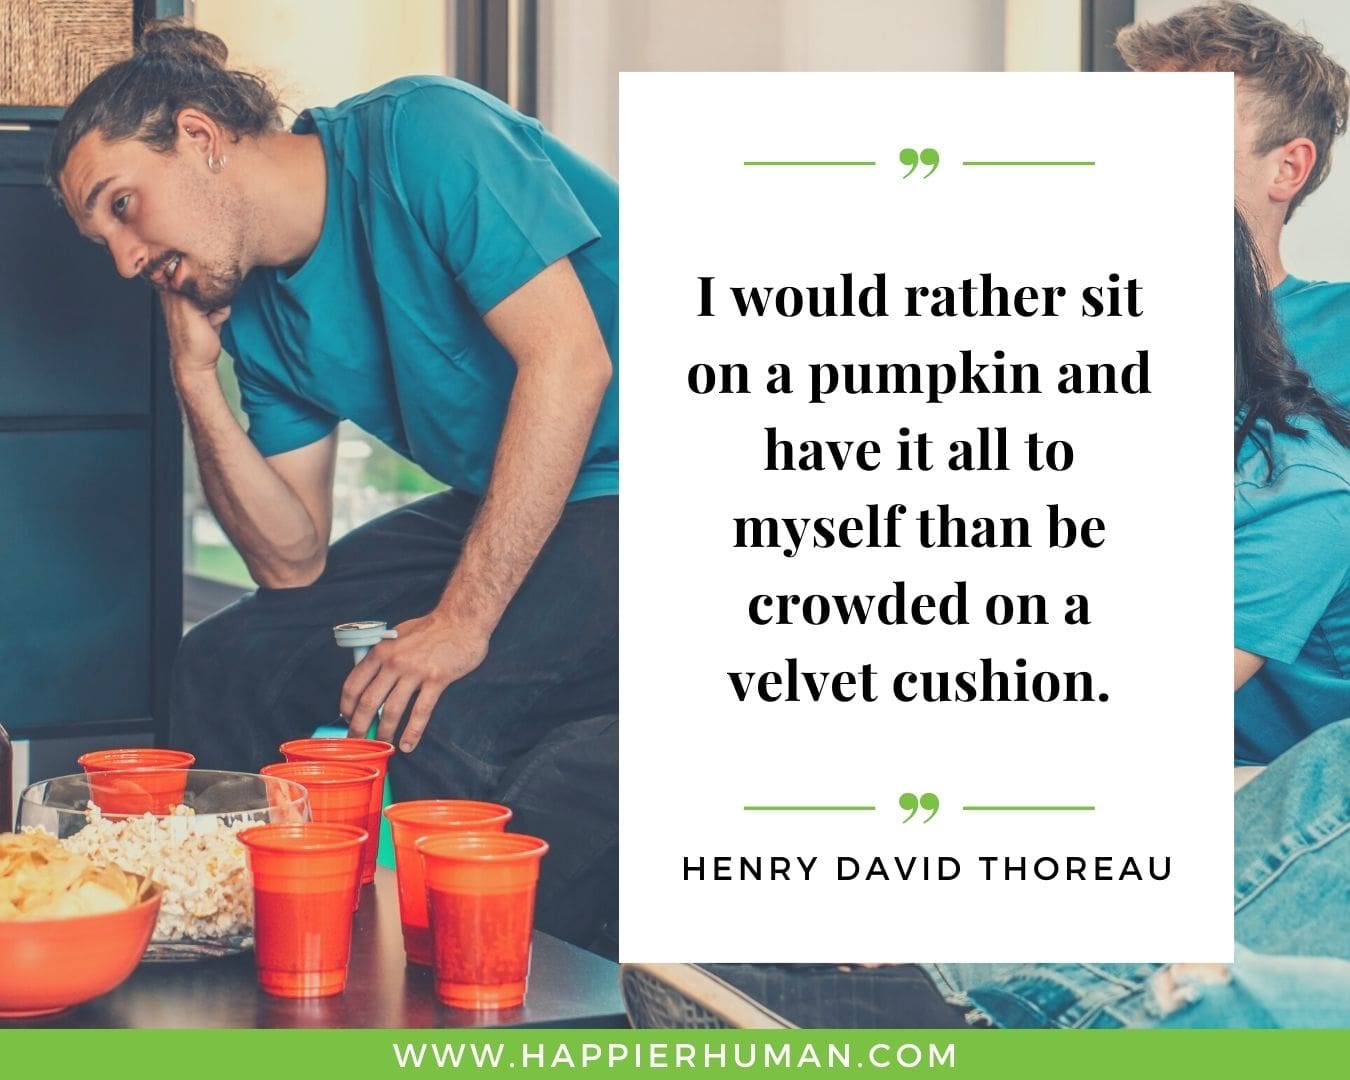 Introvert Quotes - “I would rather sit on a pumpkin and have it all to myself than be crowded on a velvet cushion.” – Henry David Thoreau